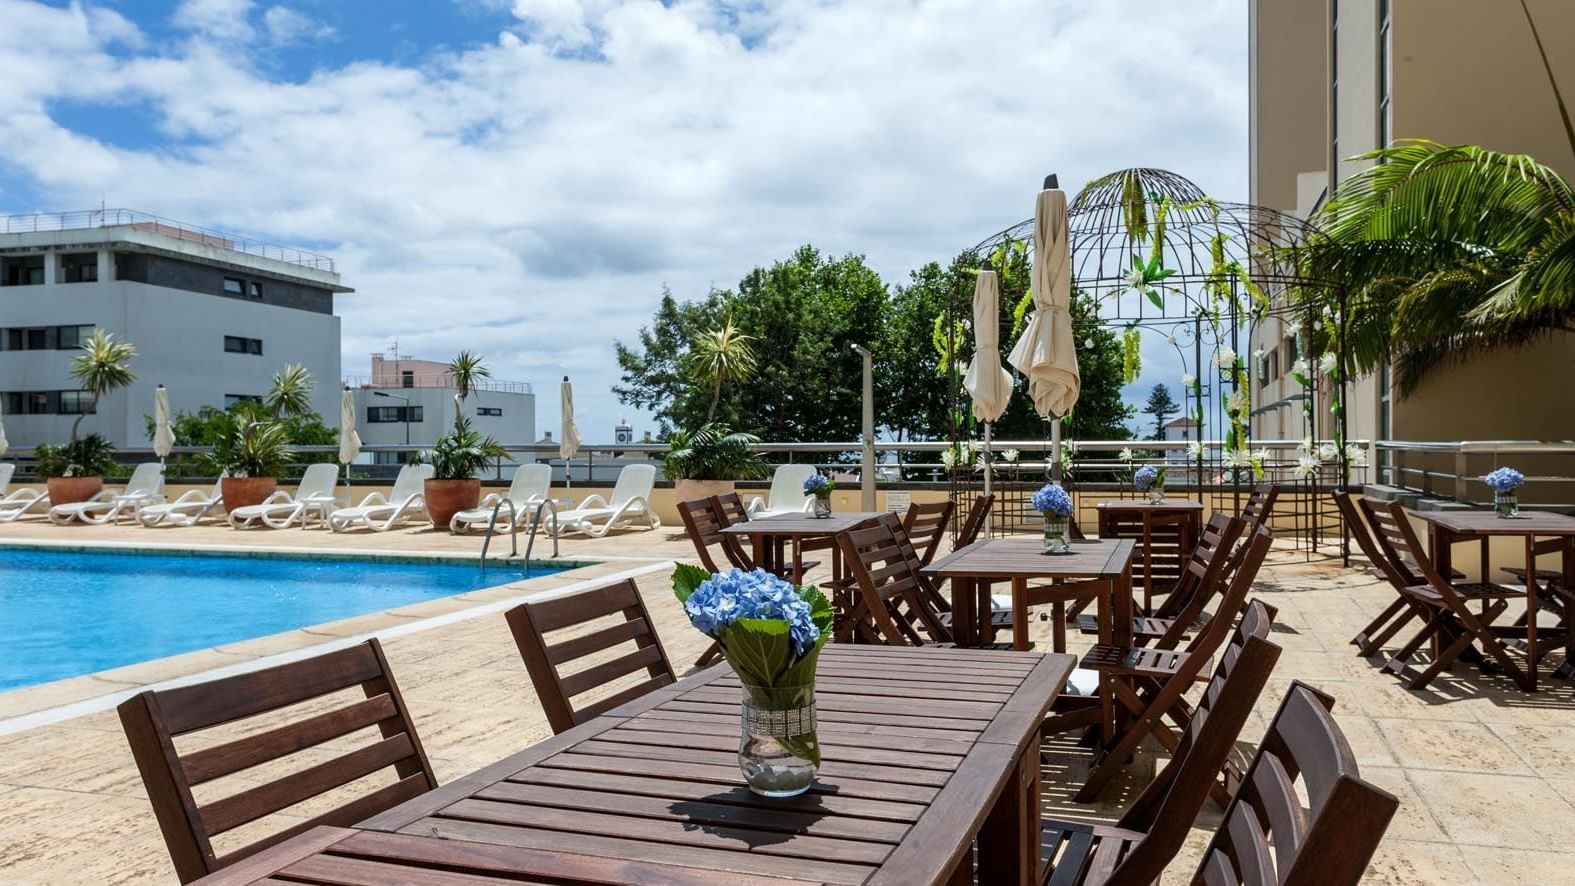 Tables by an outdoor pool in  Bar Atlantida at Bensaude Hotels